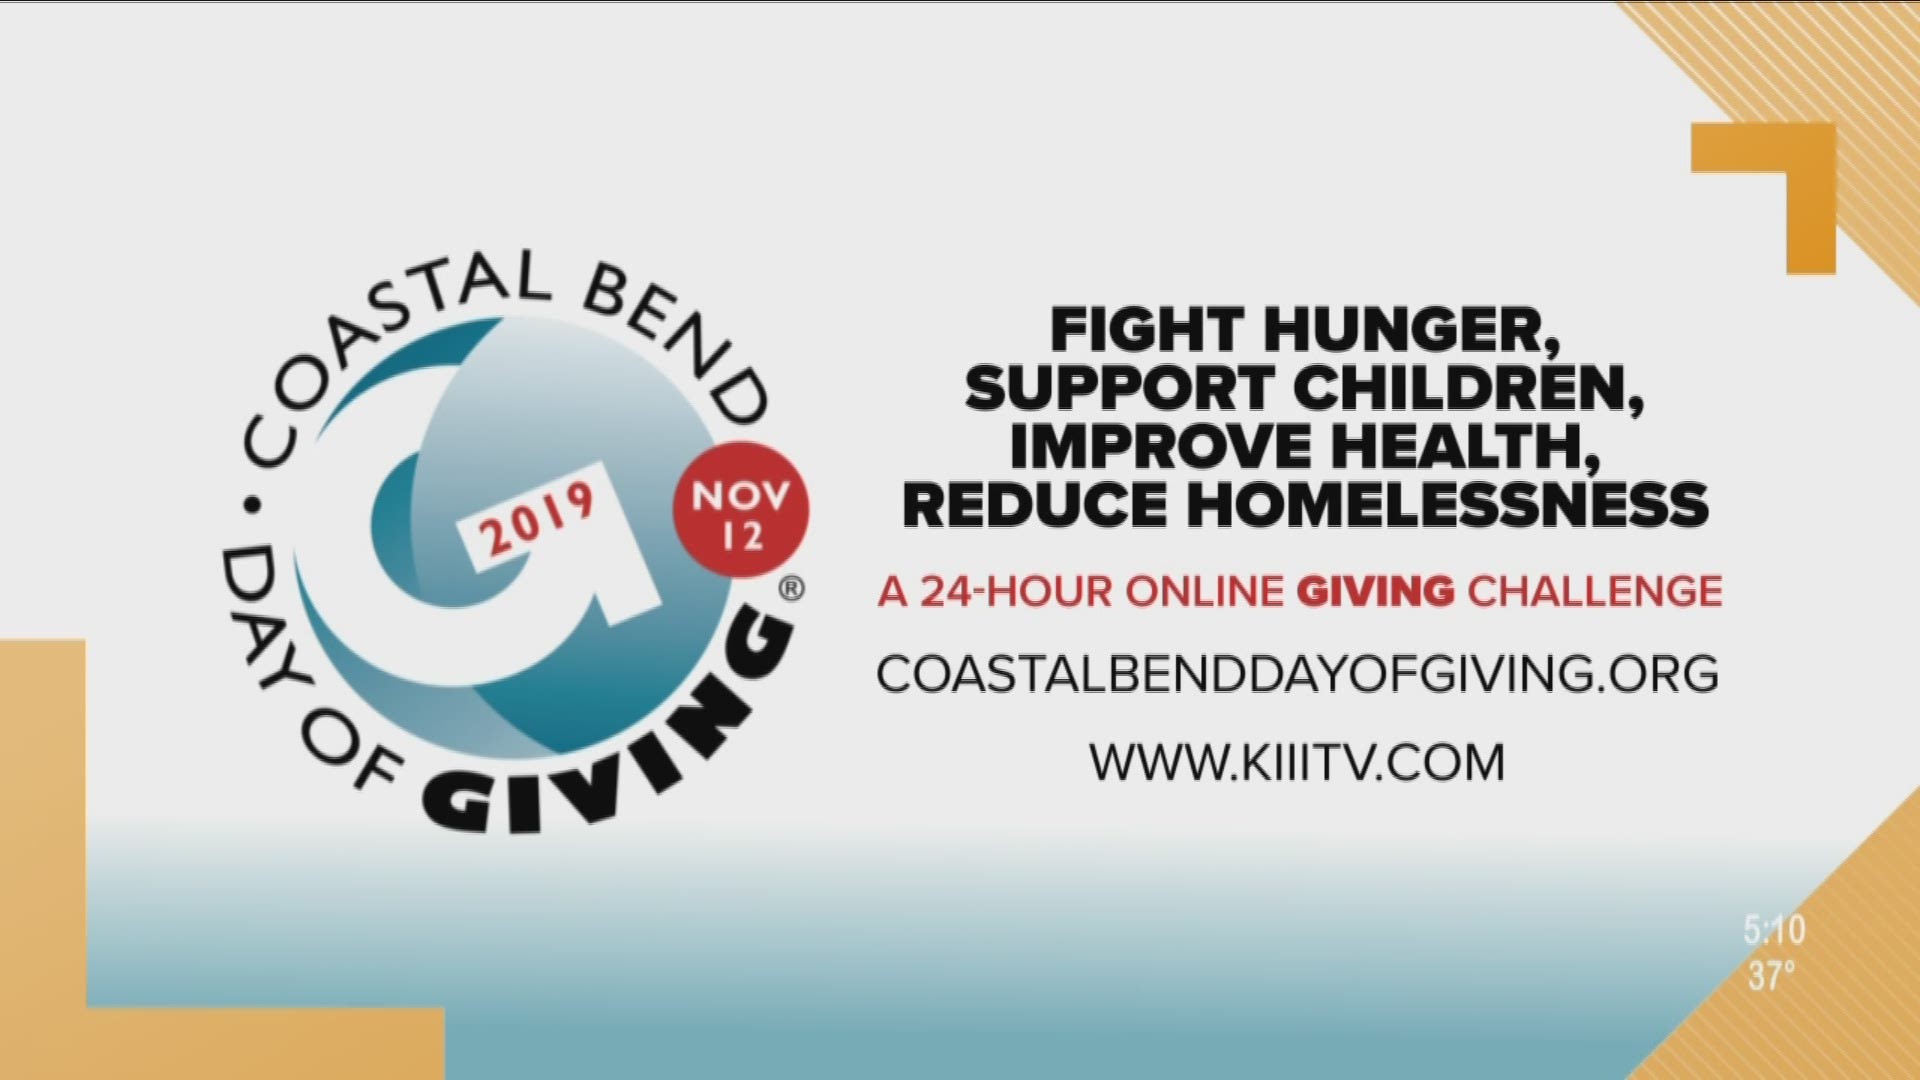 The 11th Annual Coastal Bend Day of Giving kicked off on Tuesday at Midnight and as of 5:00 a.m. the group had already raised more than $500,000.